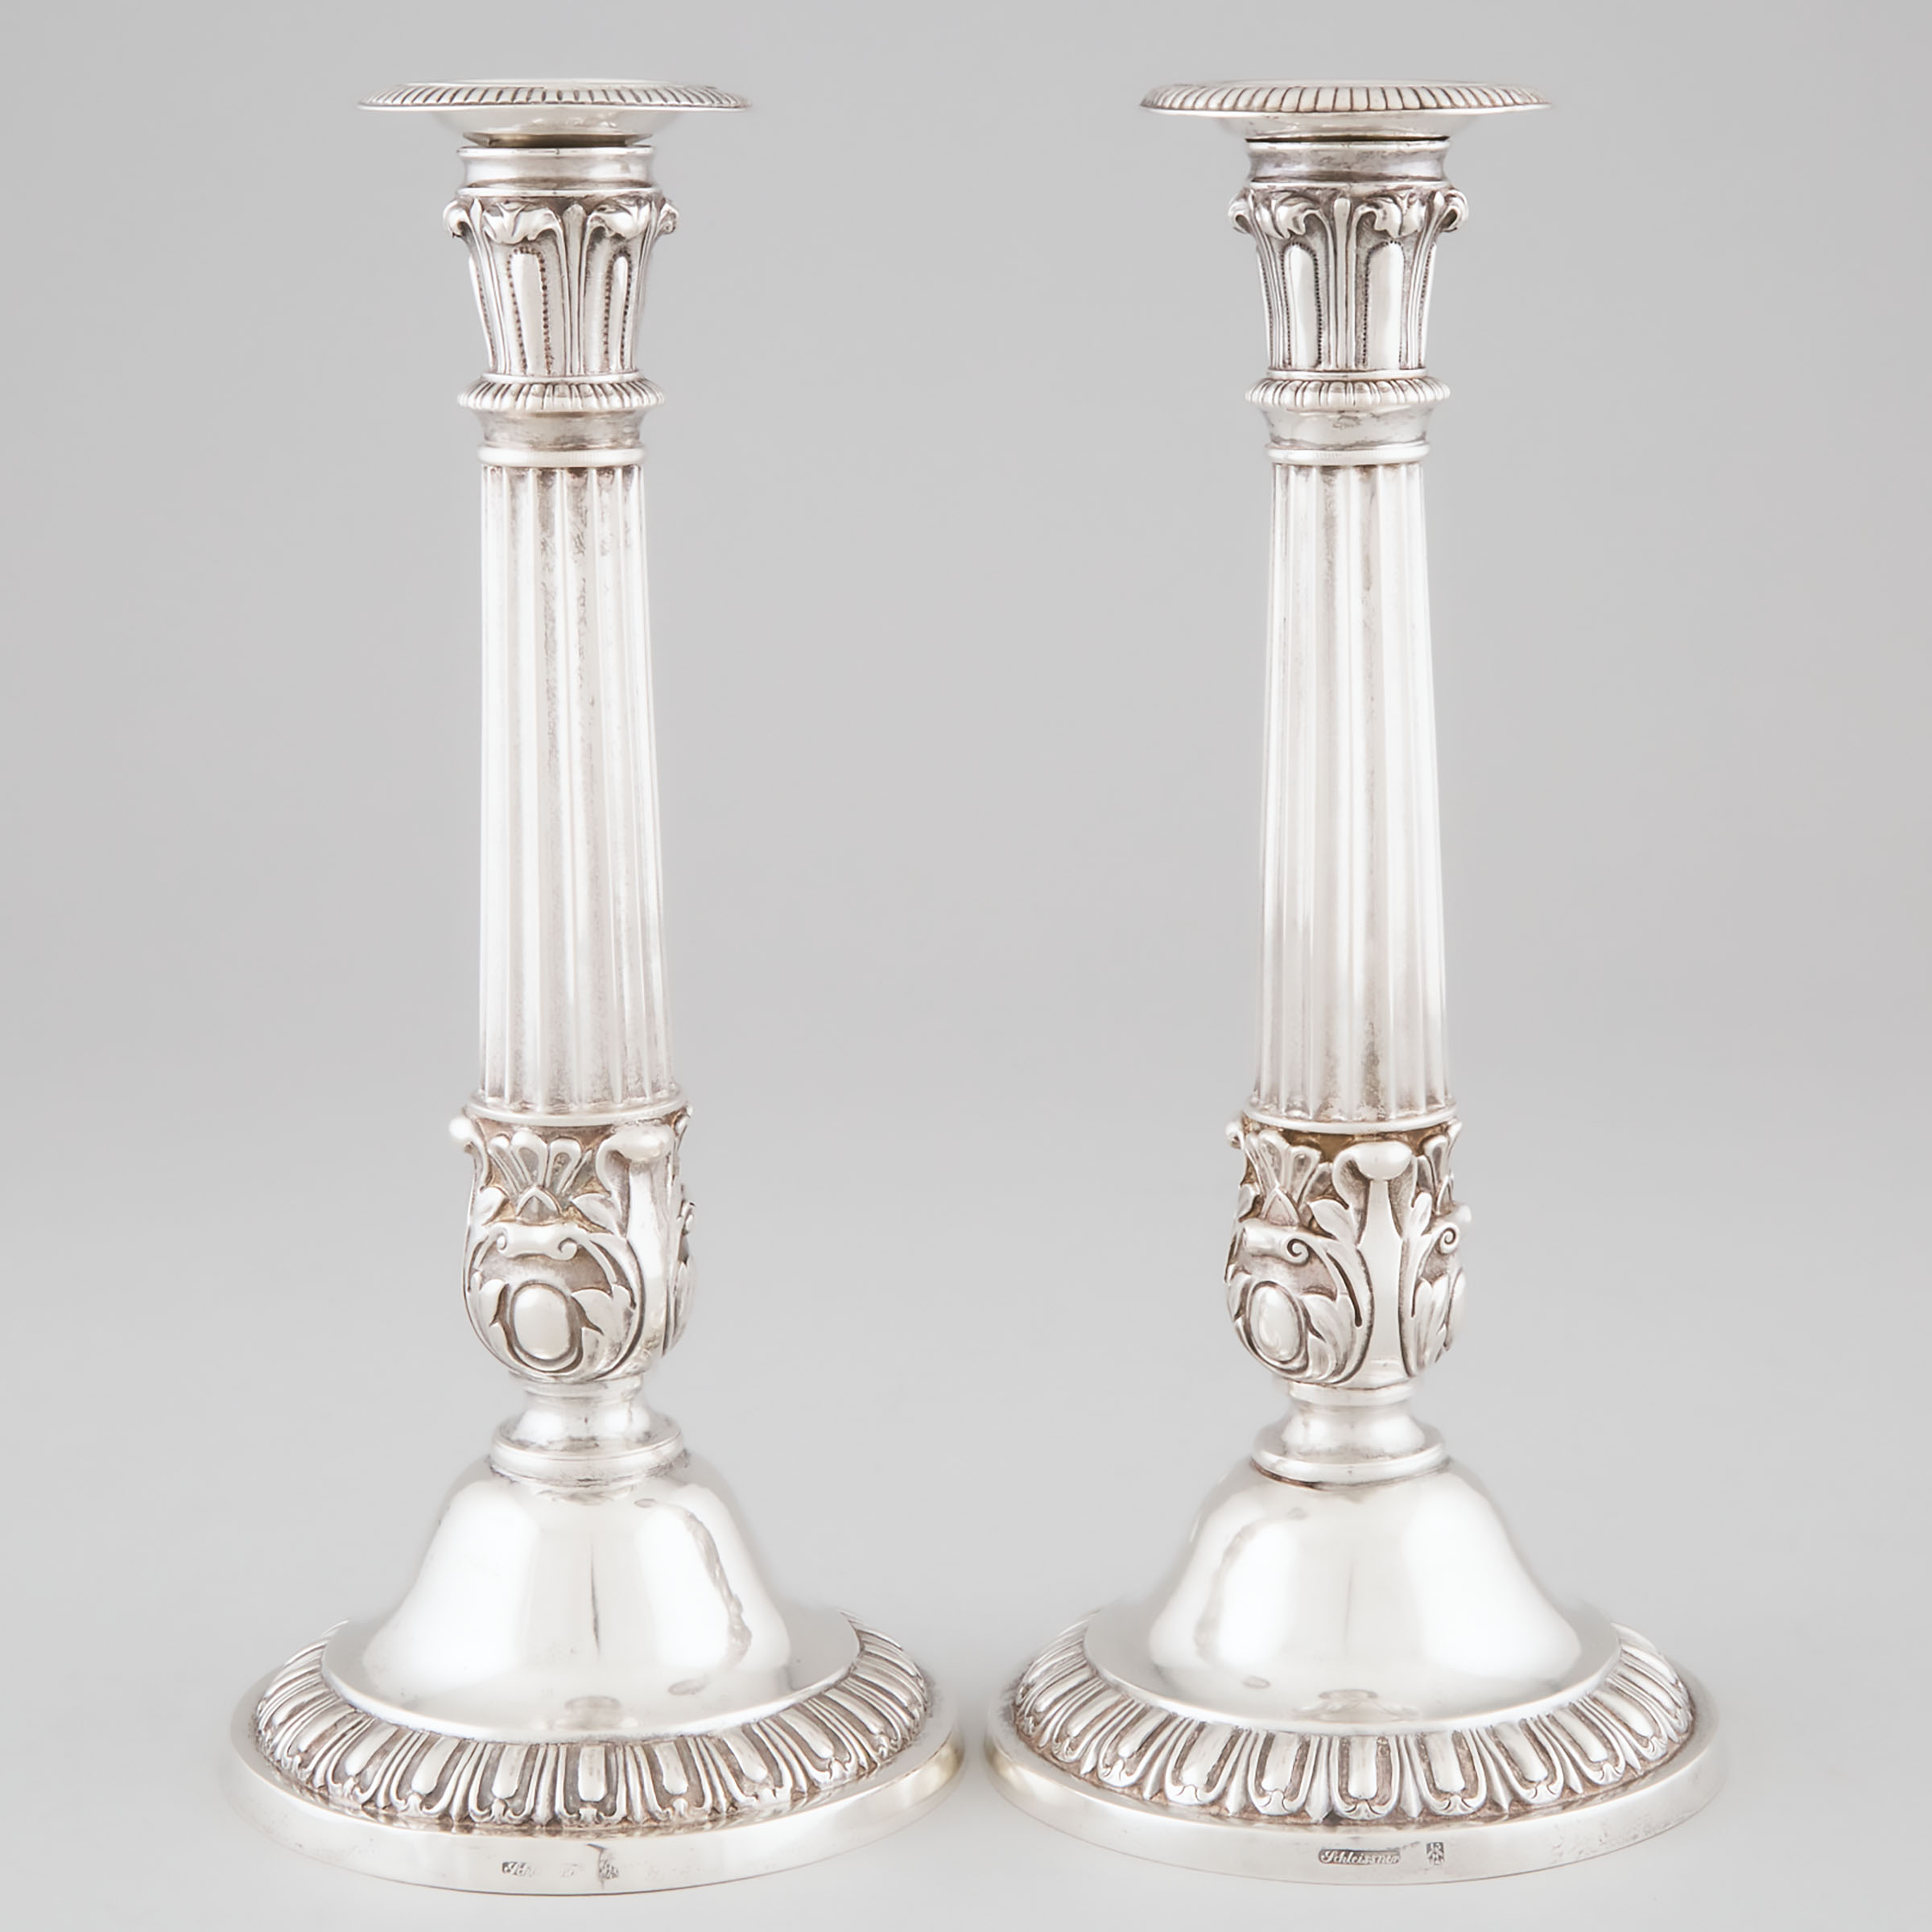 Pair of German Silver Table Candlesticks  2a565a